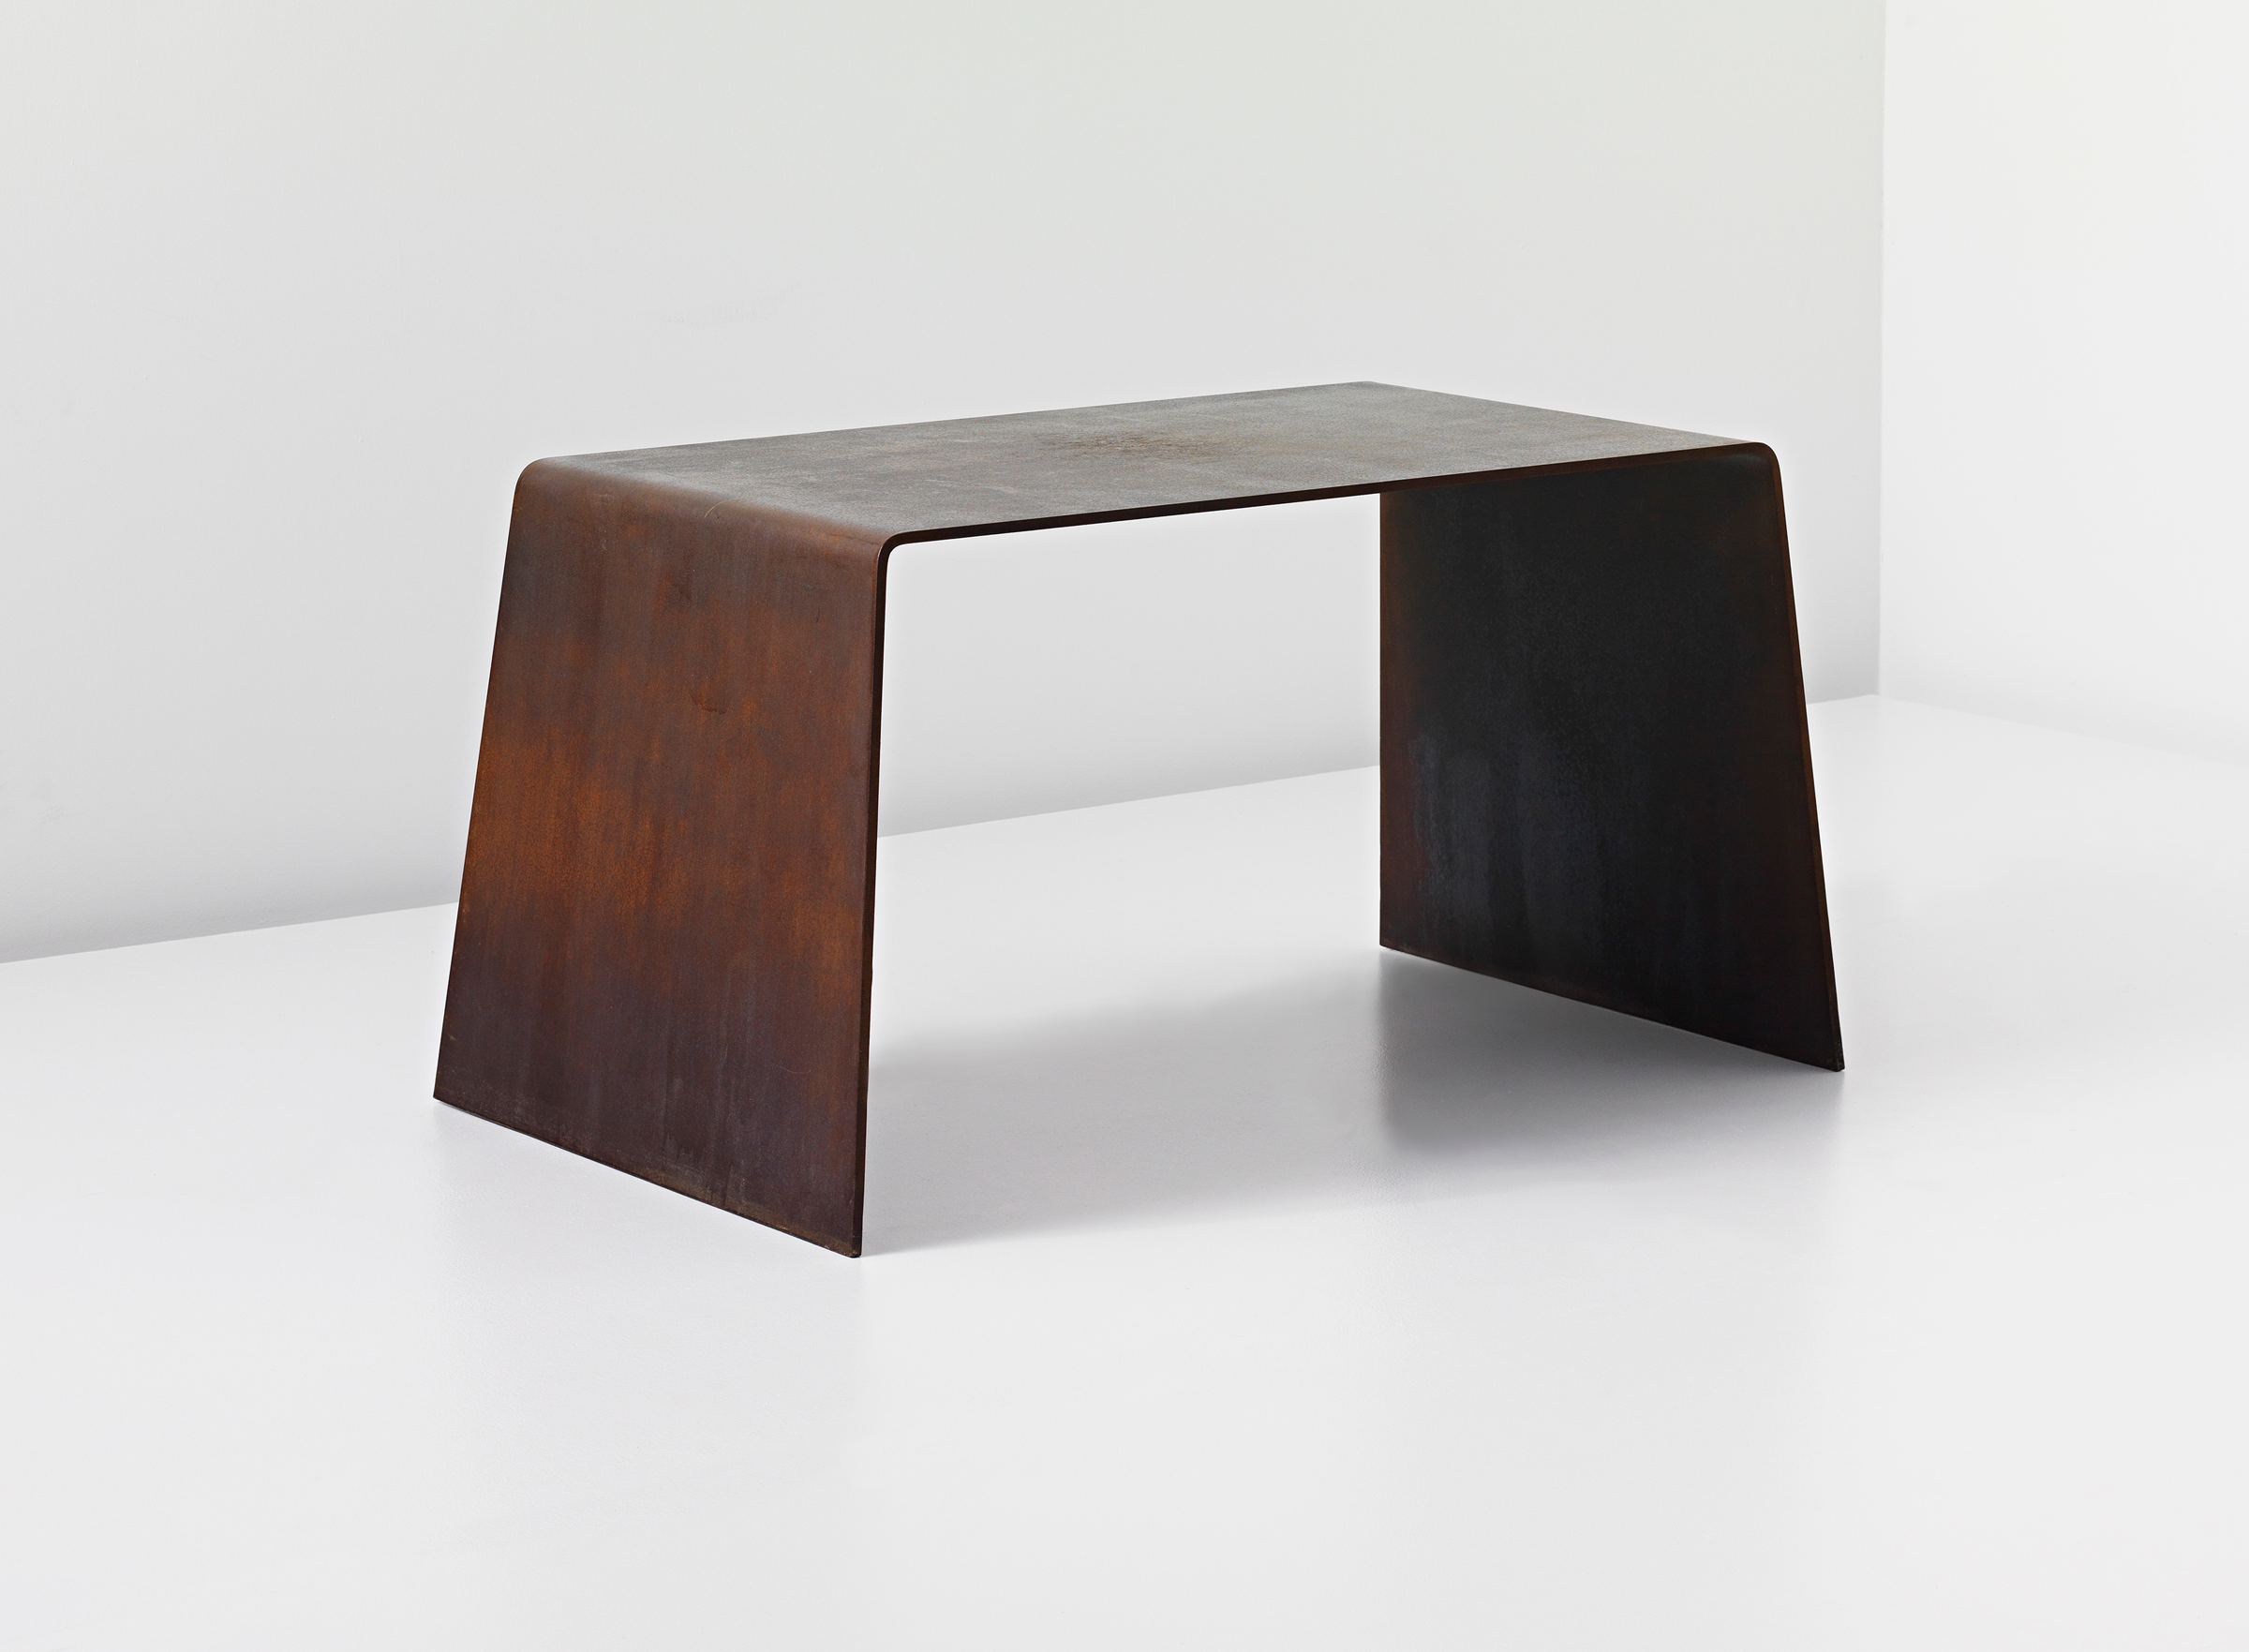 SCOTT BURTON, Prototype ‘Table for Four’ from the ‘Steel Furniture’ series